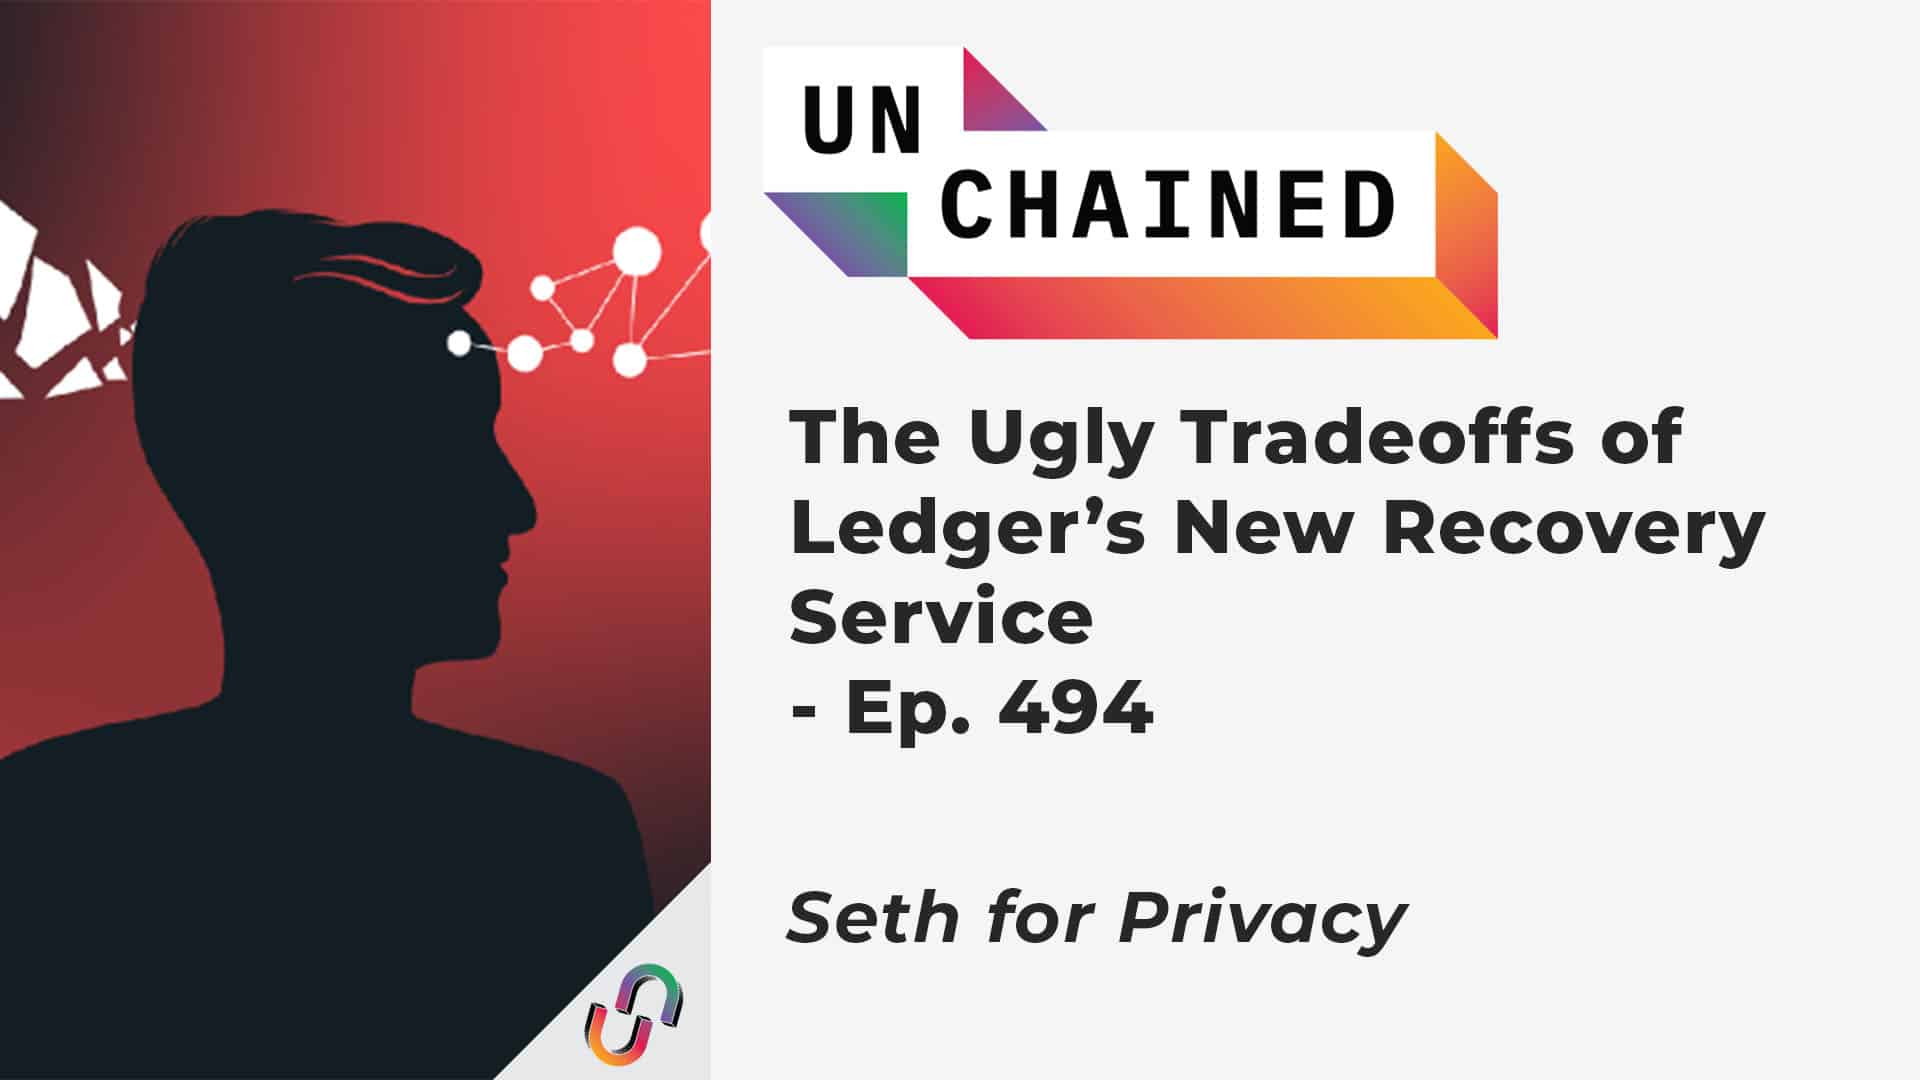 The Ugly Tradeoffs of Ledger’s New Recovery Service - Ep. 494